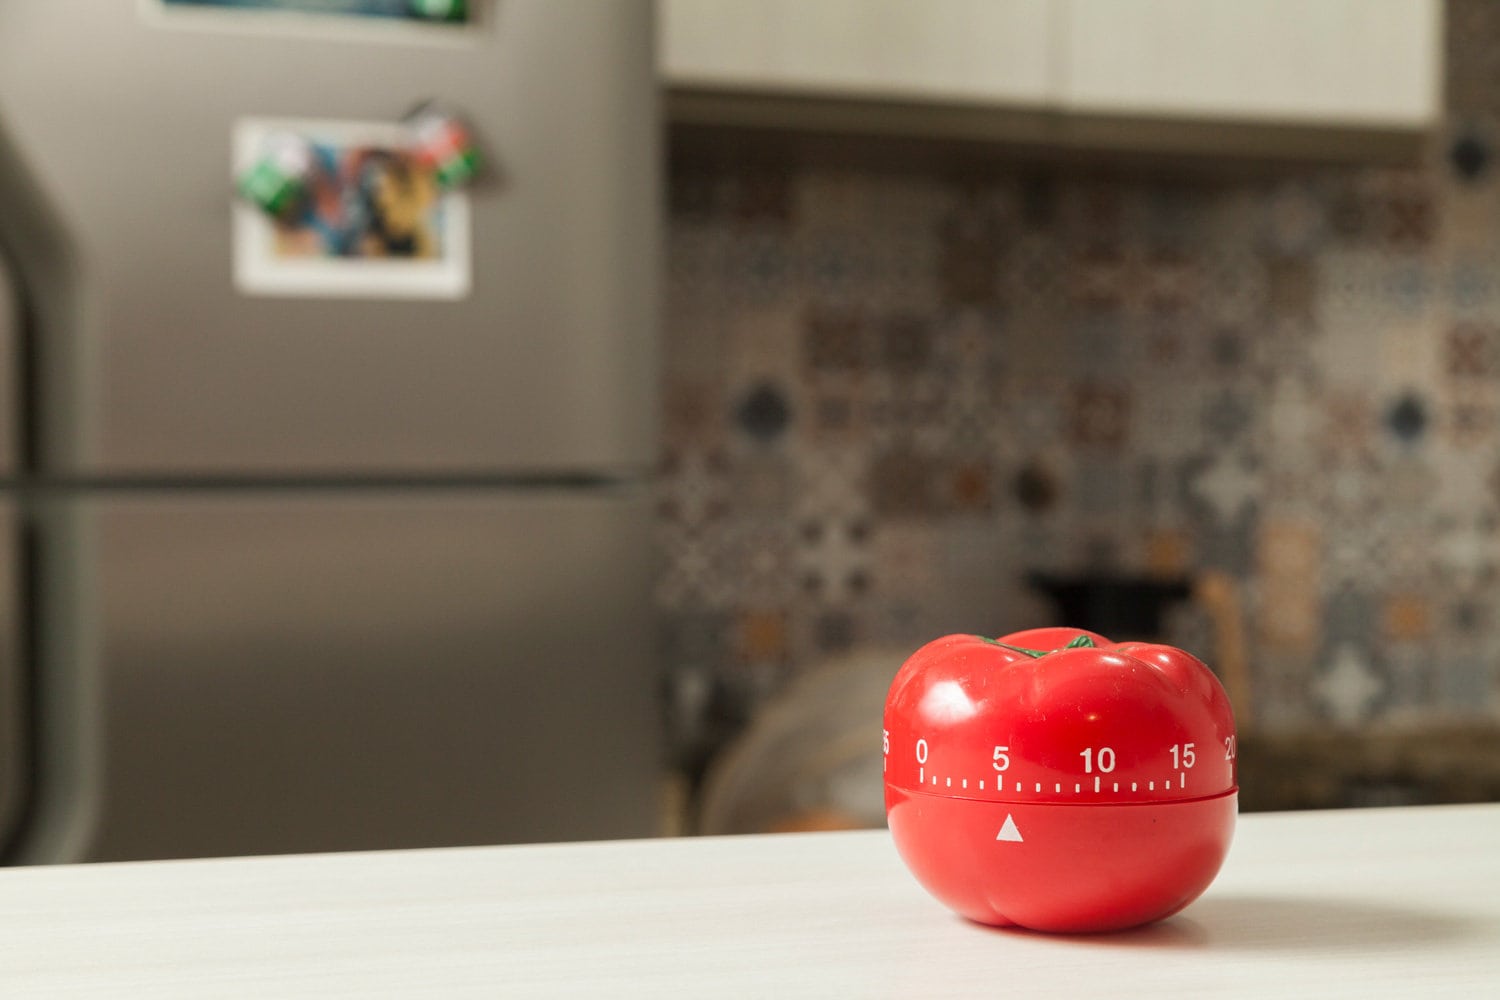 Red tomato-shaped kitchen timer with cooking in the background. To let you know when to turn off the stove and food is ready. Brazilian cuisine. Kitchen concept. Household appliance concept.